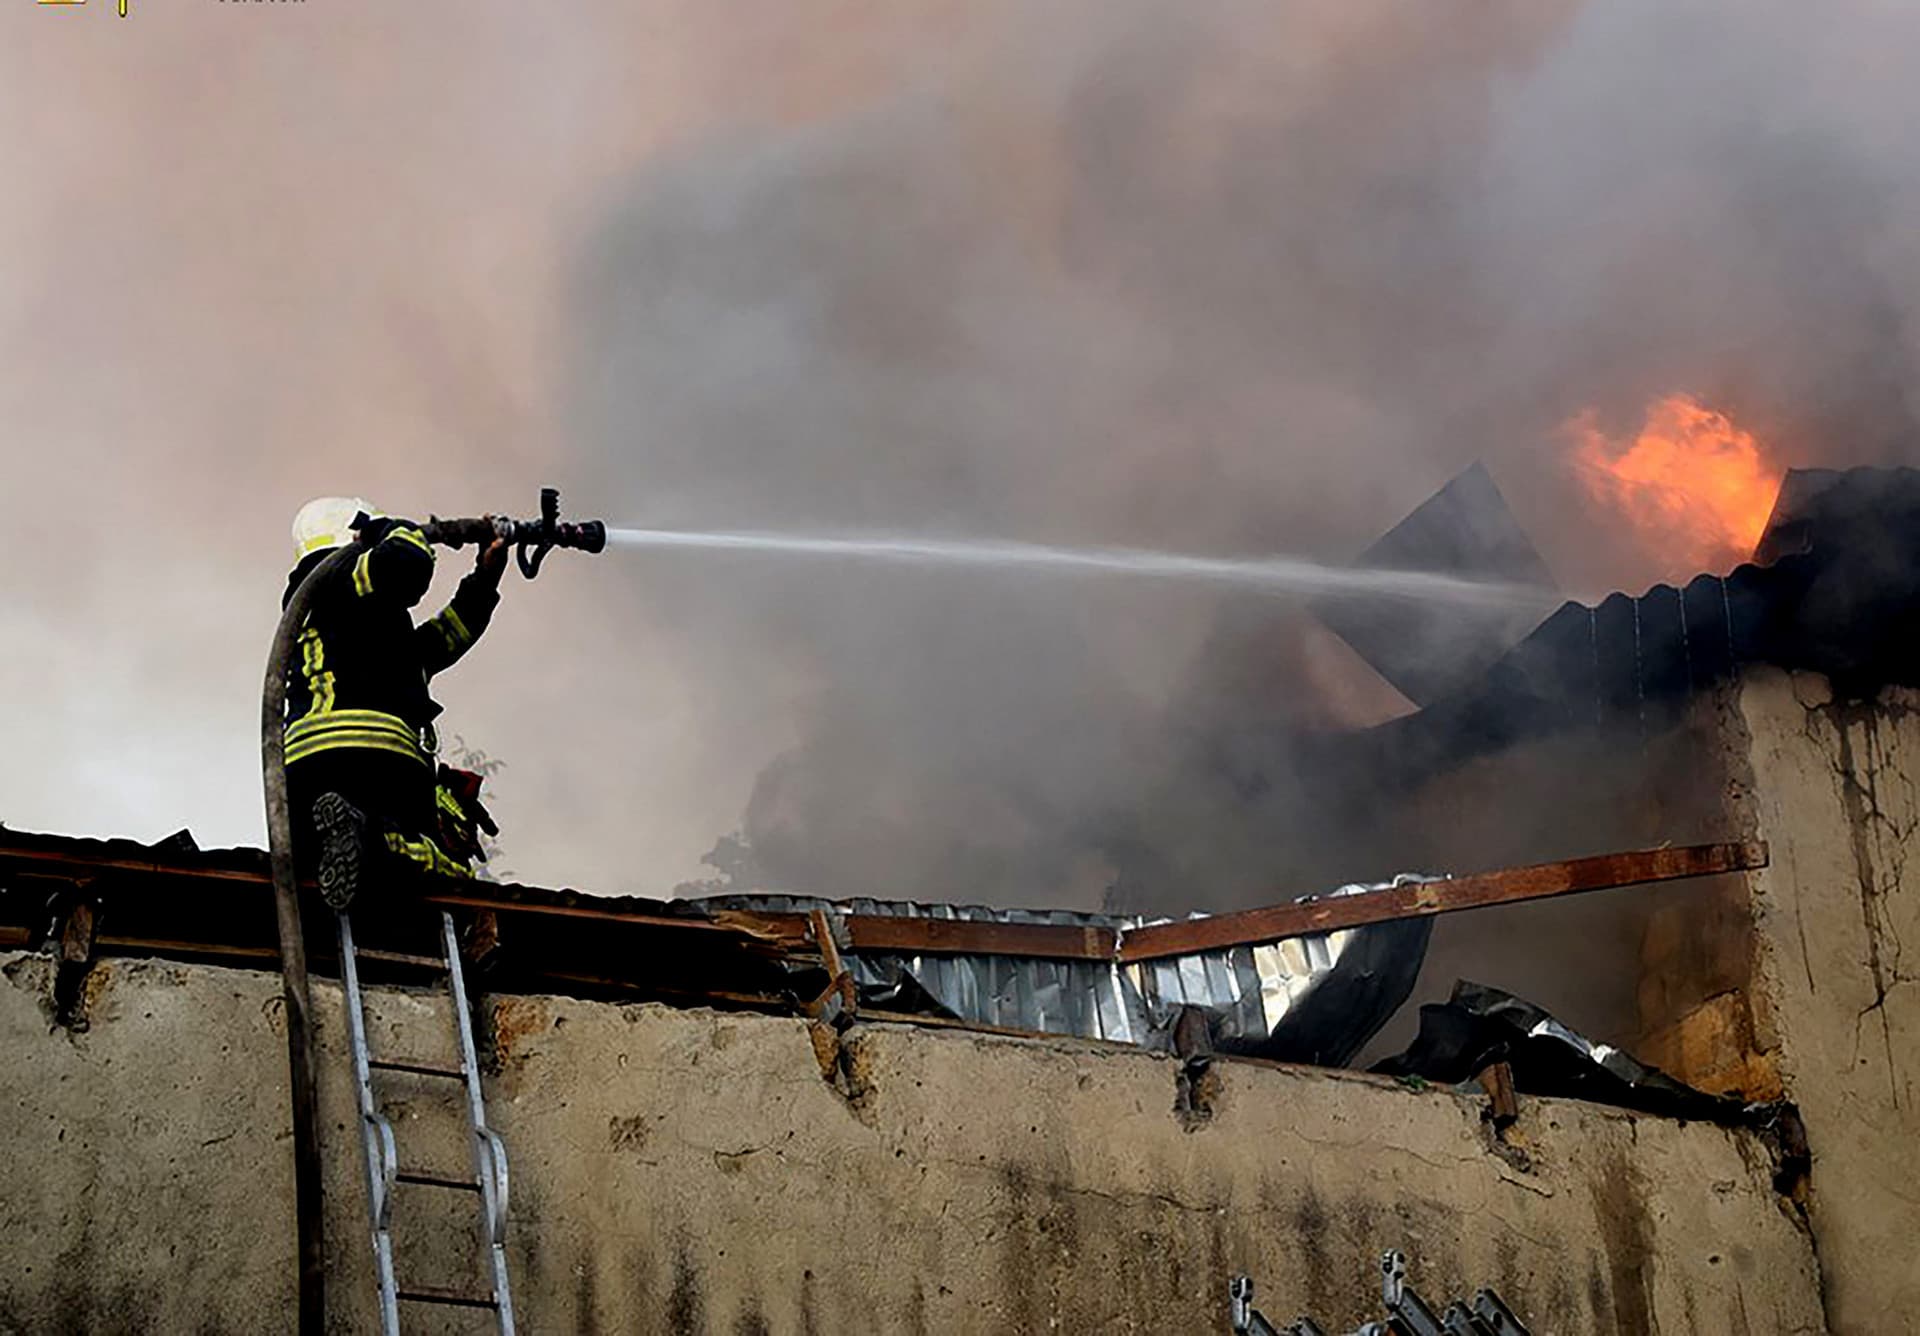 A firefighter puts out a fire on a building after shelling in Mykolaiv, Ukraine